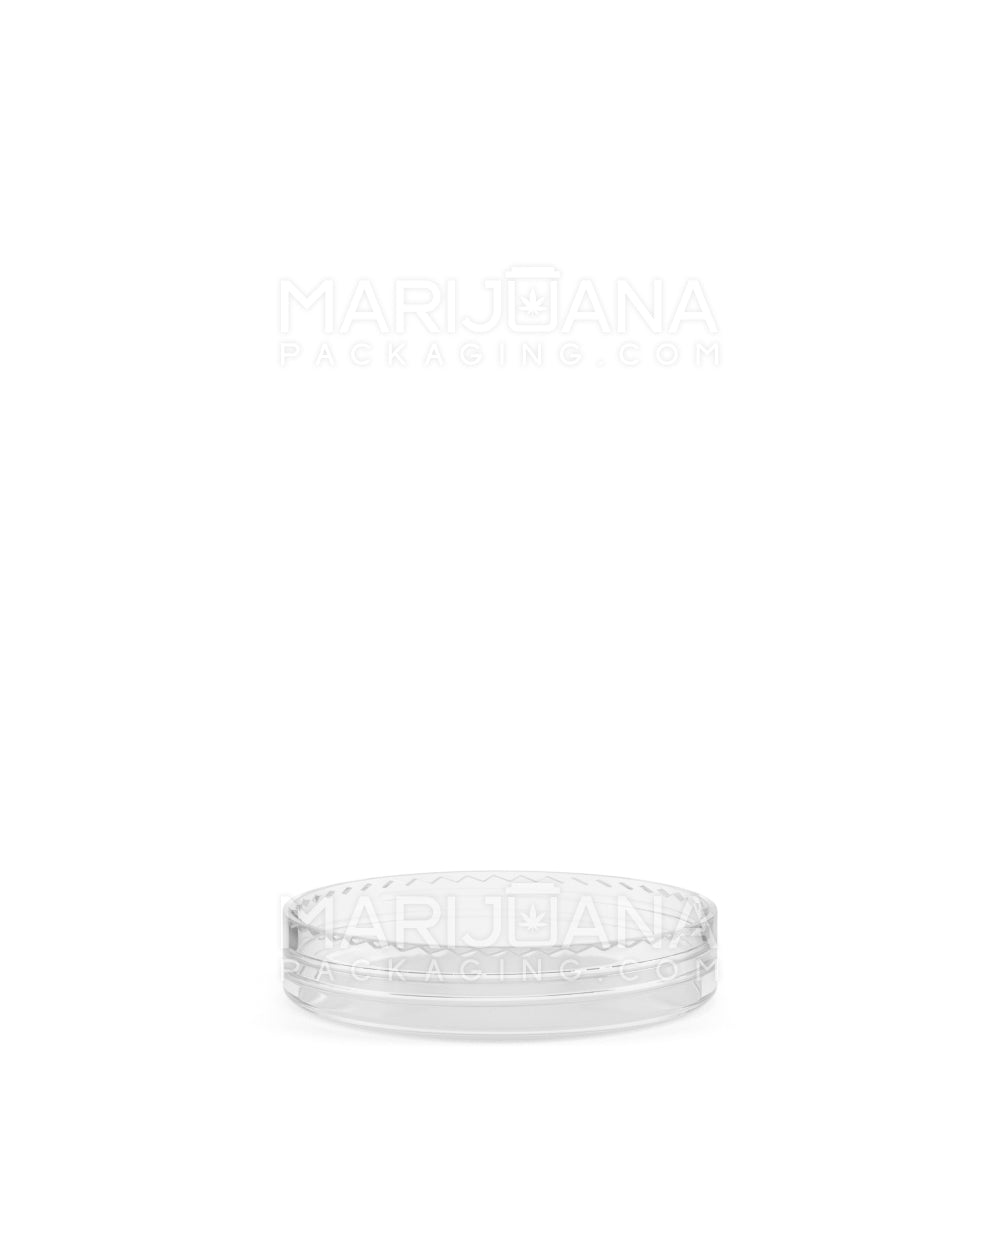 Clear Concentrate Containers w/ Screw Top Cap | 7mL - Acrylic - 200 Count - 11